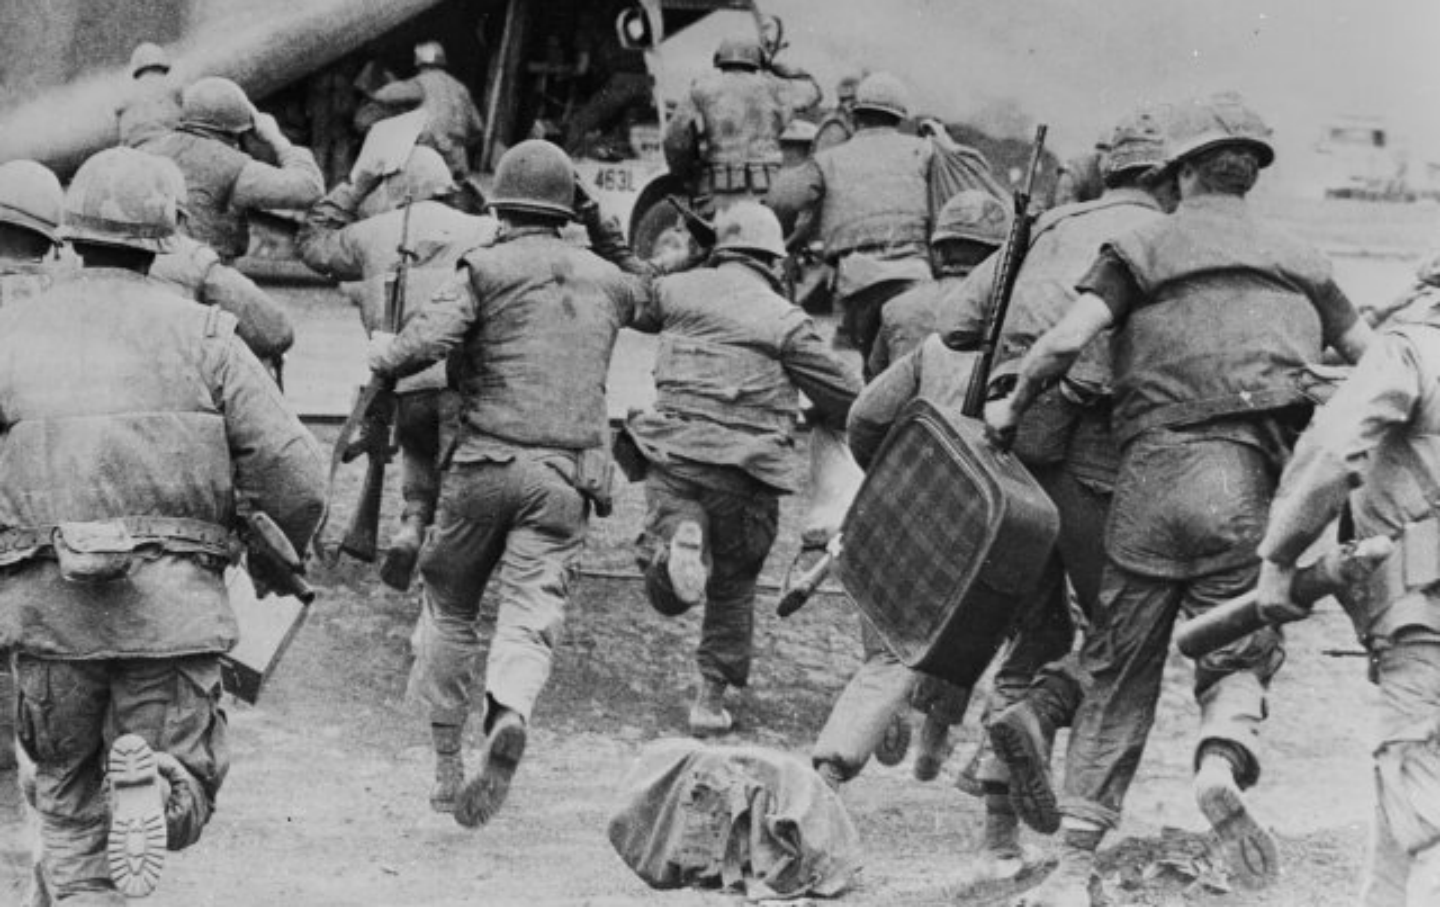 40 Years On, the Taste of Defeat in Vietnam Has Only Become More Rancid